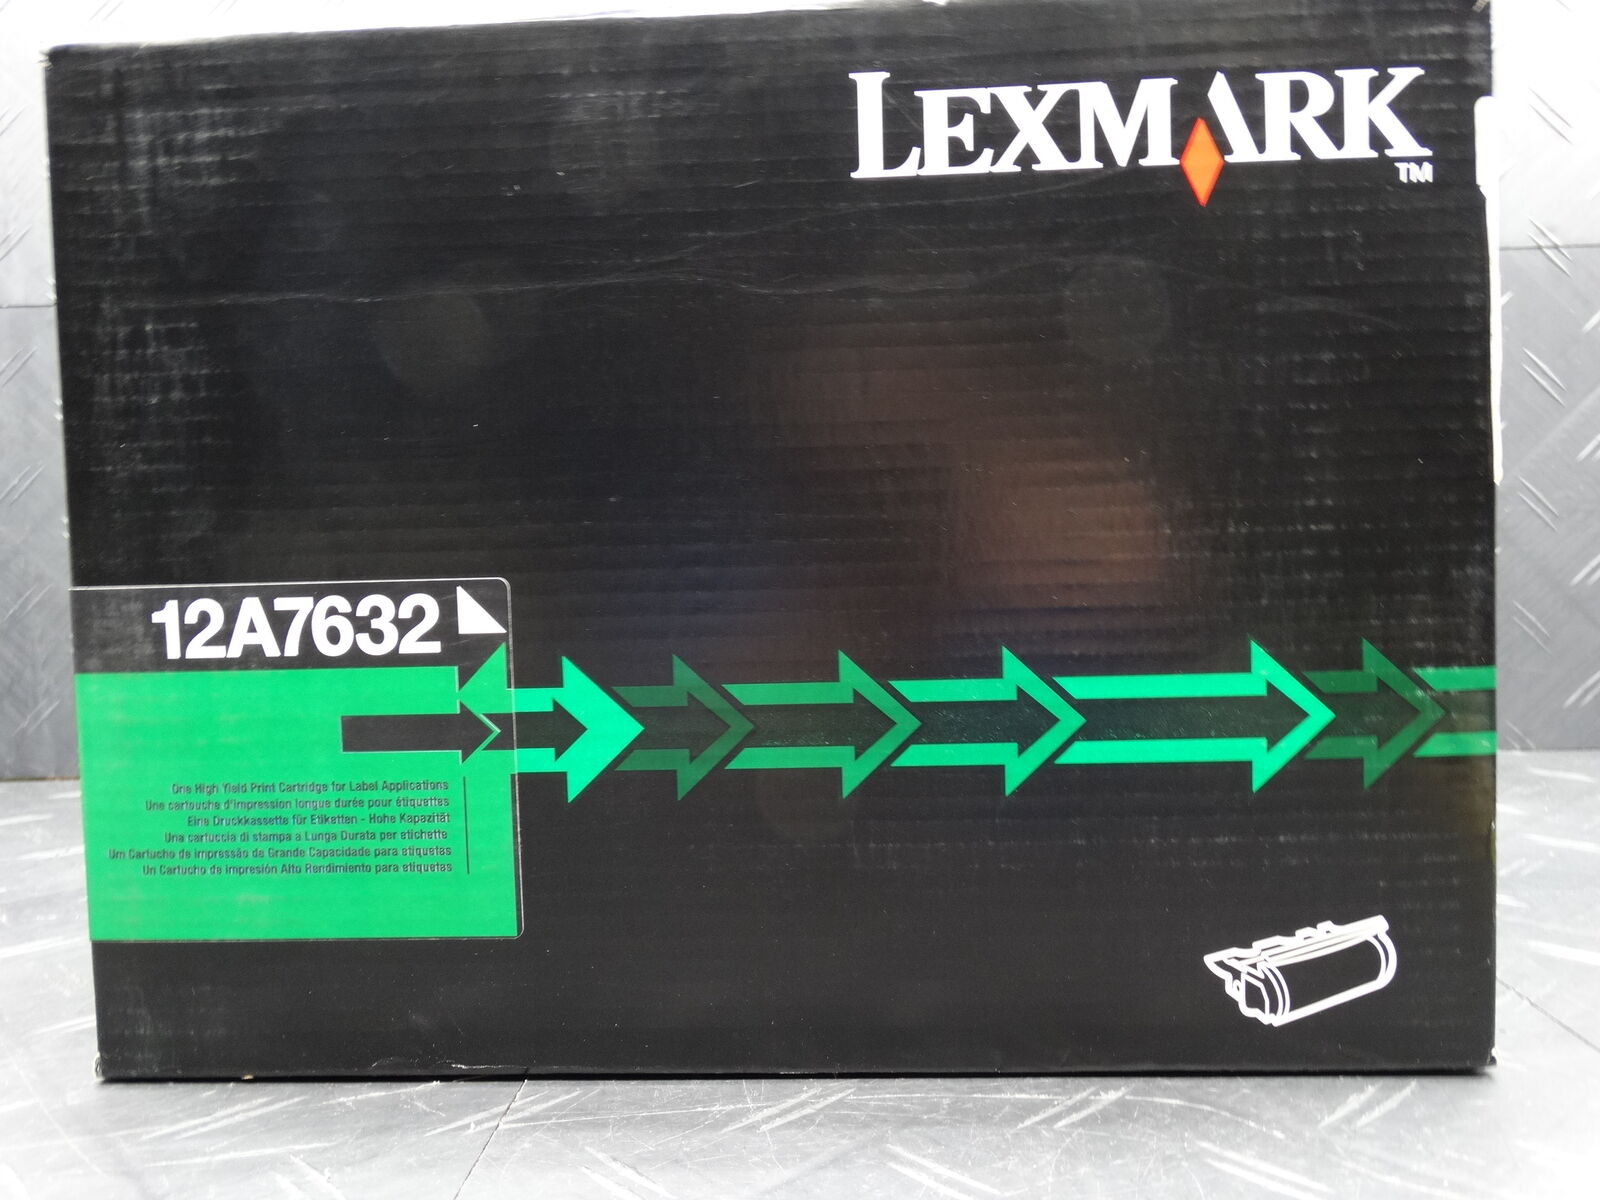 Lexmark 12A7632 One High Yield Print Cartridge for Label Application New